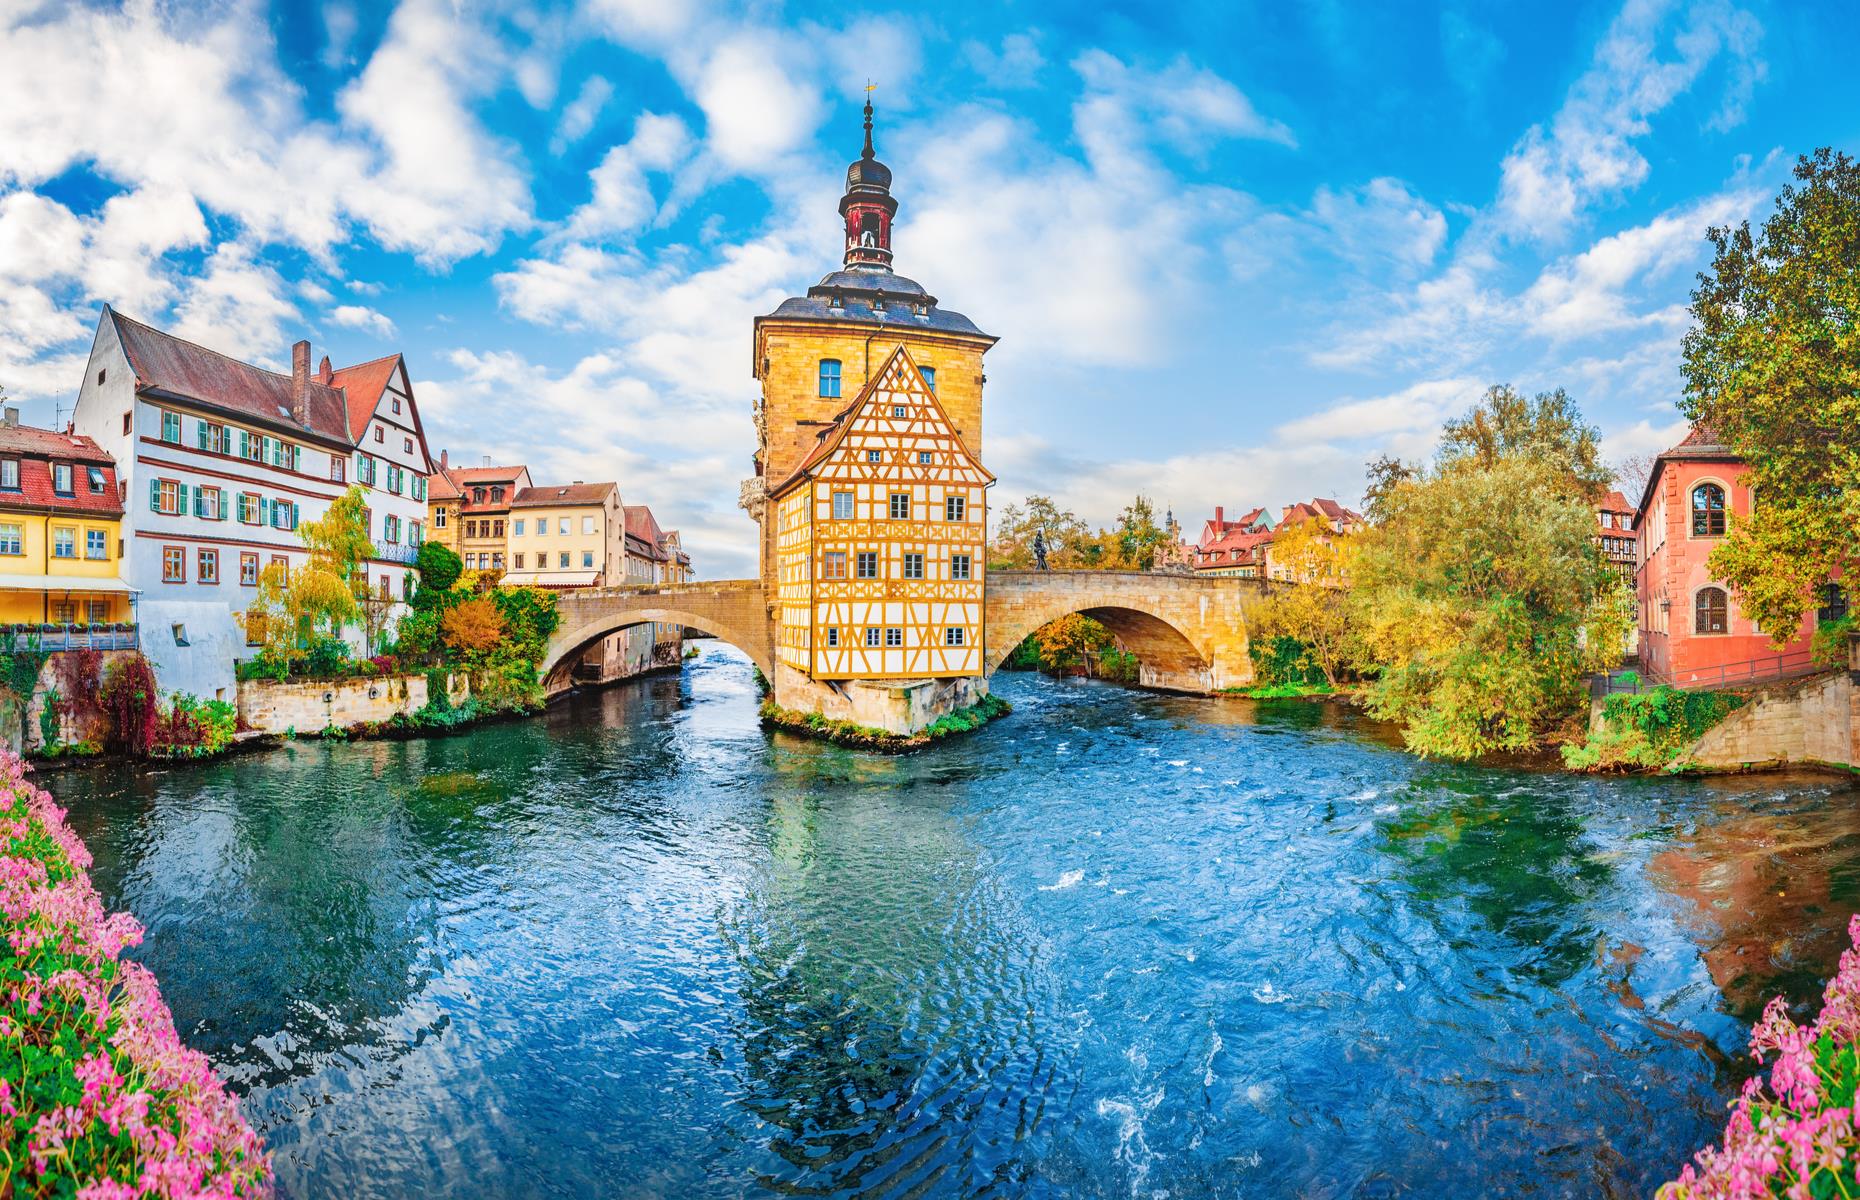 <p>Towns don’t come much prettier than this Bavarian beauty. In the north of the region, <a href="http://whc.unesco.org/en/list/624">Bamberg</a> has some perfectly preserved structures sweeping from the 11th to 19th centuries and had a huge architectural influence in Germany and beyond. Unsurprisingly, given its beauty, it attracted some great writers and philosophers and was a center of Enlightenment. Highlights include the Romanesque-Gothic cathedral, the Baroque New Palace and the medieval stone bridges that lead to Altes Rathaus (the old town hall), on an artificial island.</p>  <p><a href="https://www.loveexploring.com/gallerylist/83040/germanys-most-beautiful-towns-and-villages"><strong>See more of Germany's most beautiful towns and villages here</strong></a></p>